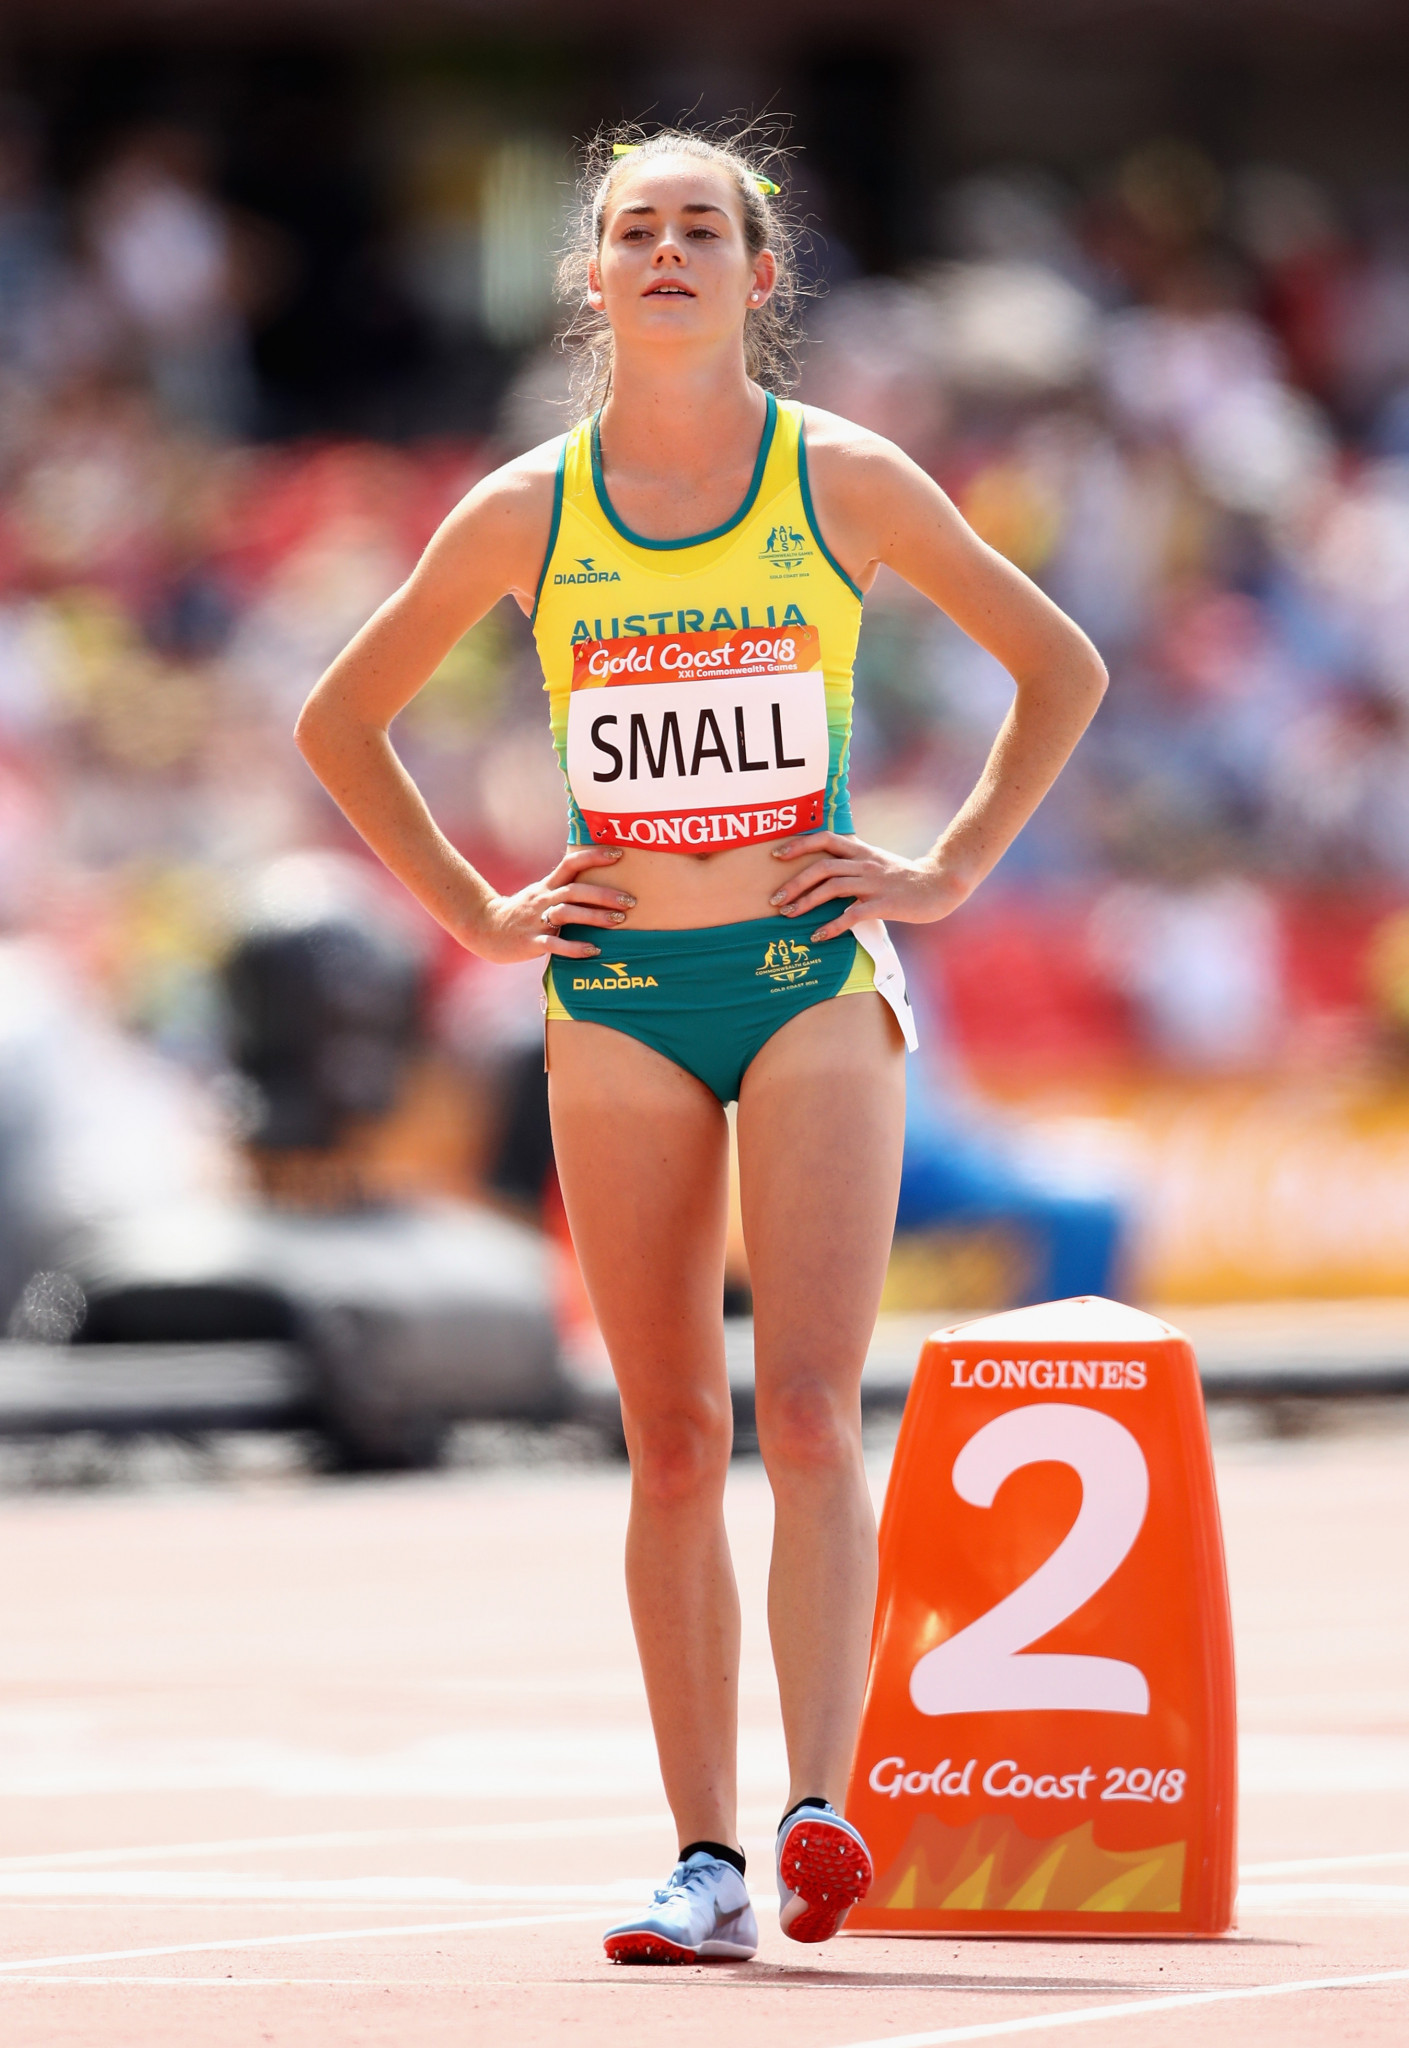 Keely Small represented Australia in the 800 meres at this year's Commonwealth Games in the Gold Coast ©Getty Images